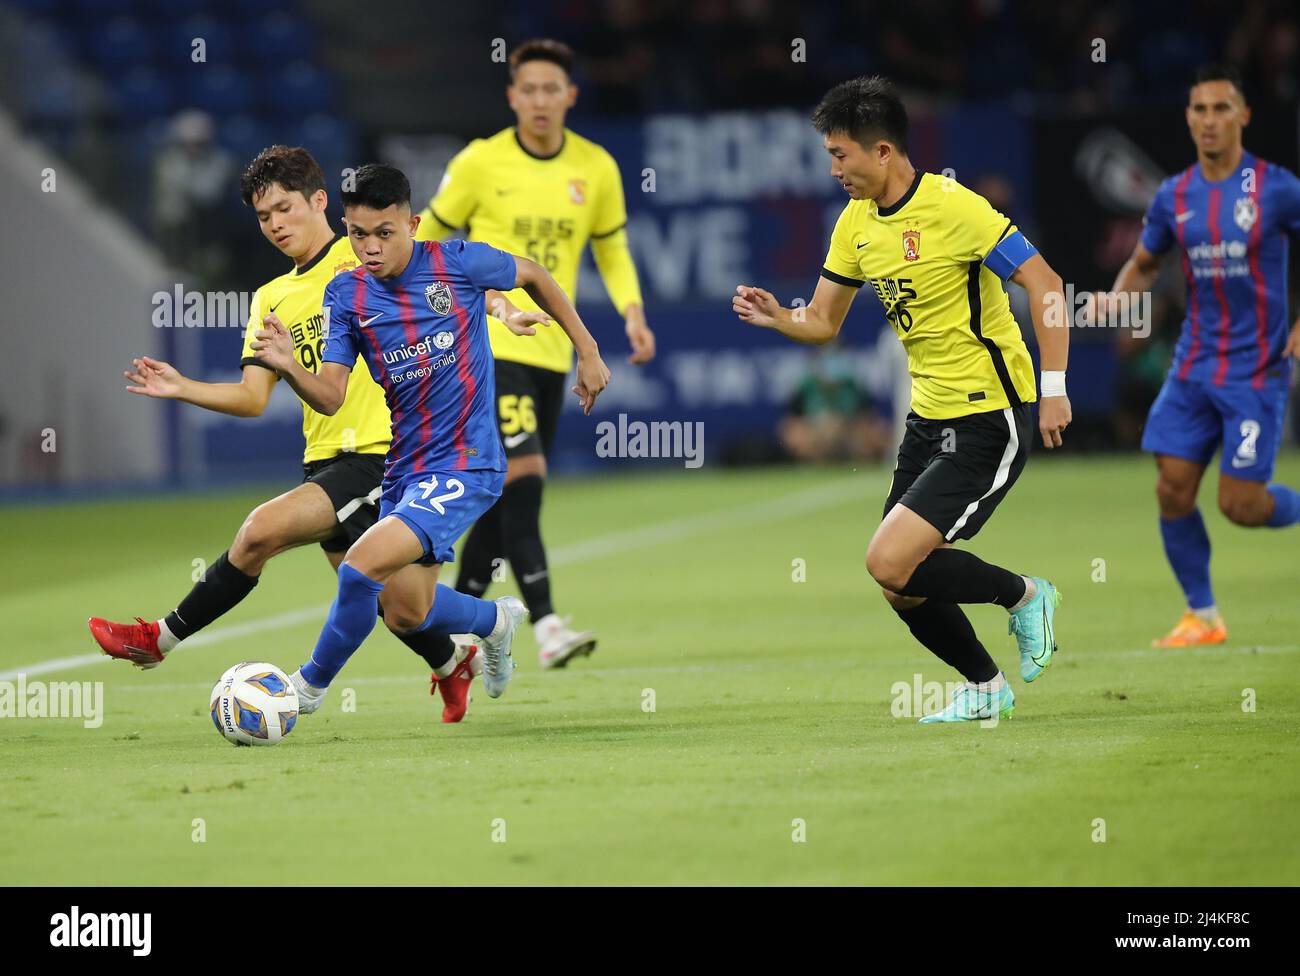 Johor Baru, Malaysia. 15th Apr, 2022. Arif Aiman of Johor Darul Ta'zim (L) and Yang Xin of Guangzhou Evergrande are seen in action during the AFC Champions League Group I match between Guangzhou Evergrande and Johor Darul Ta'zim at the Sultan Ibrahim Stadium.(Final score; Guangzhou Evergrande 0:5 Johor Darul Ta'zim) (Photo by Wong Fok Loy/SOPA Images/Sipa USA) Credit: Sipa USA/Alamy Live News Stock Photo